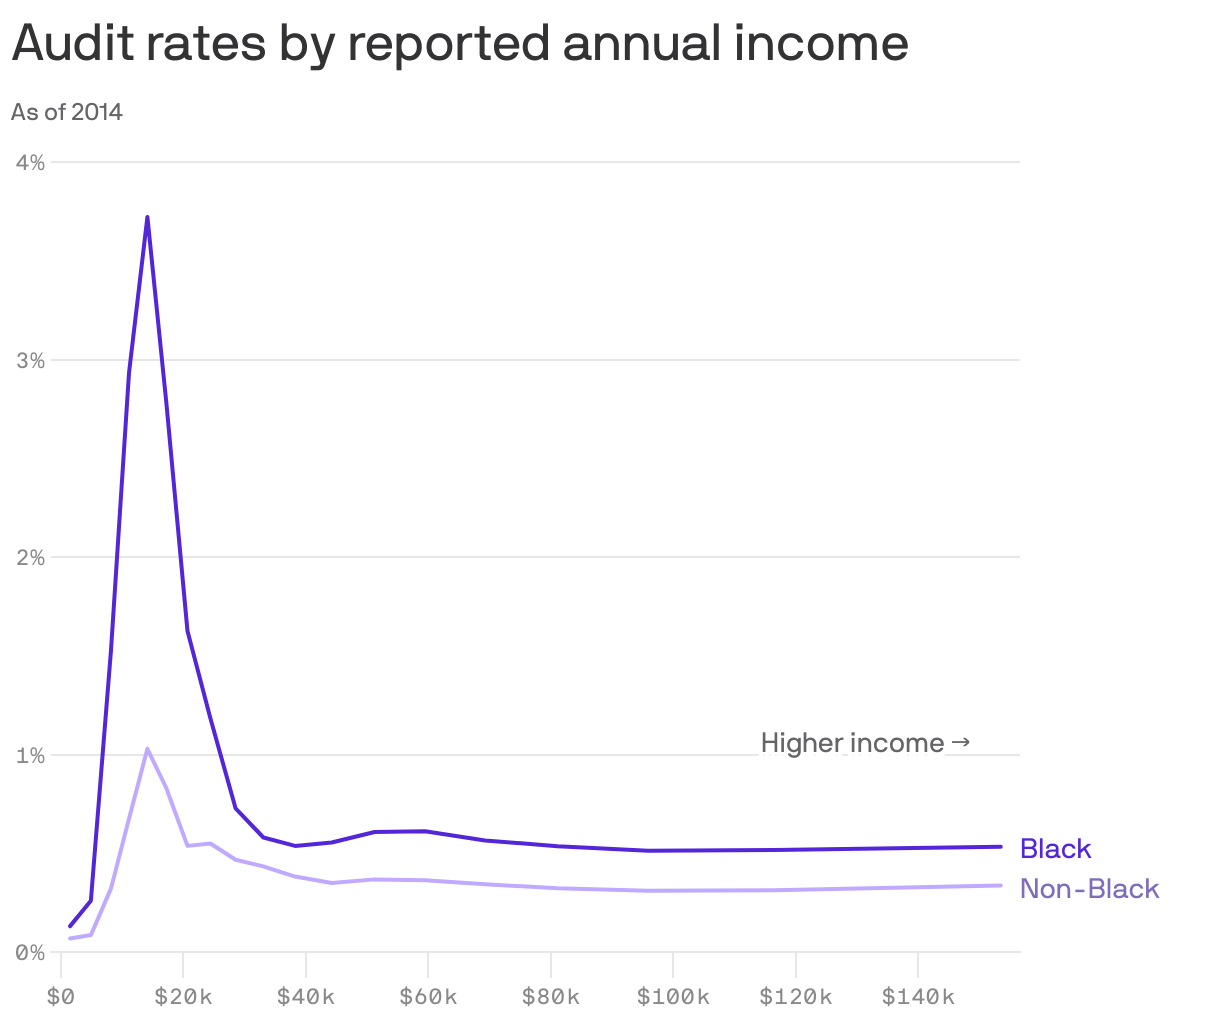 Audit rates by reported annual income